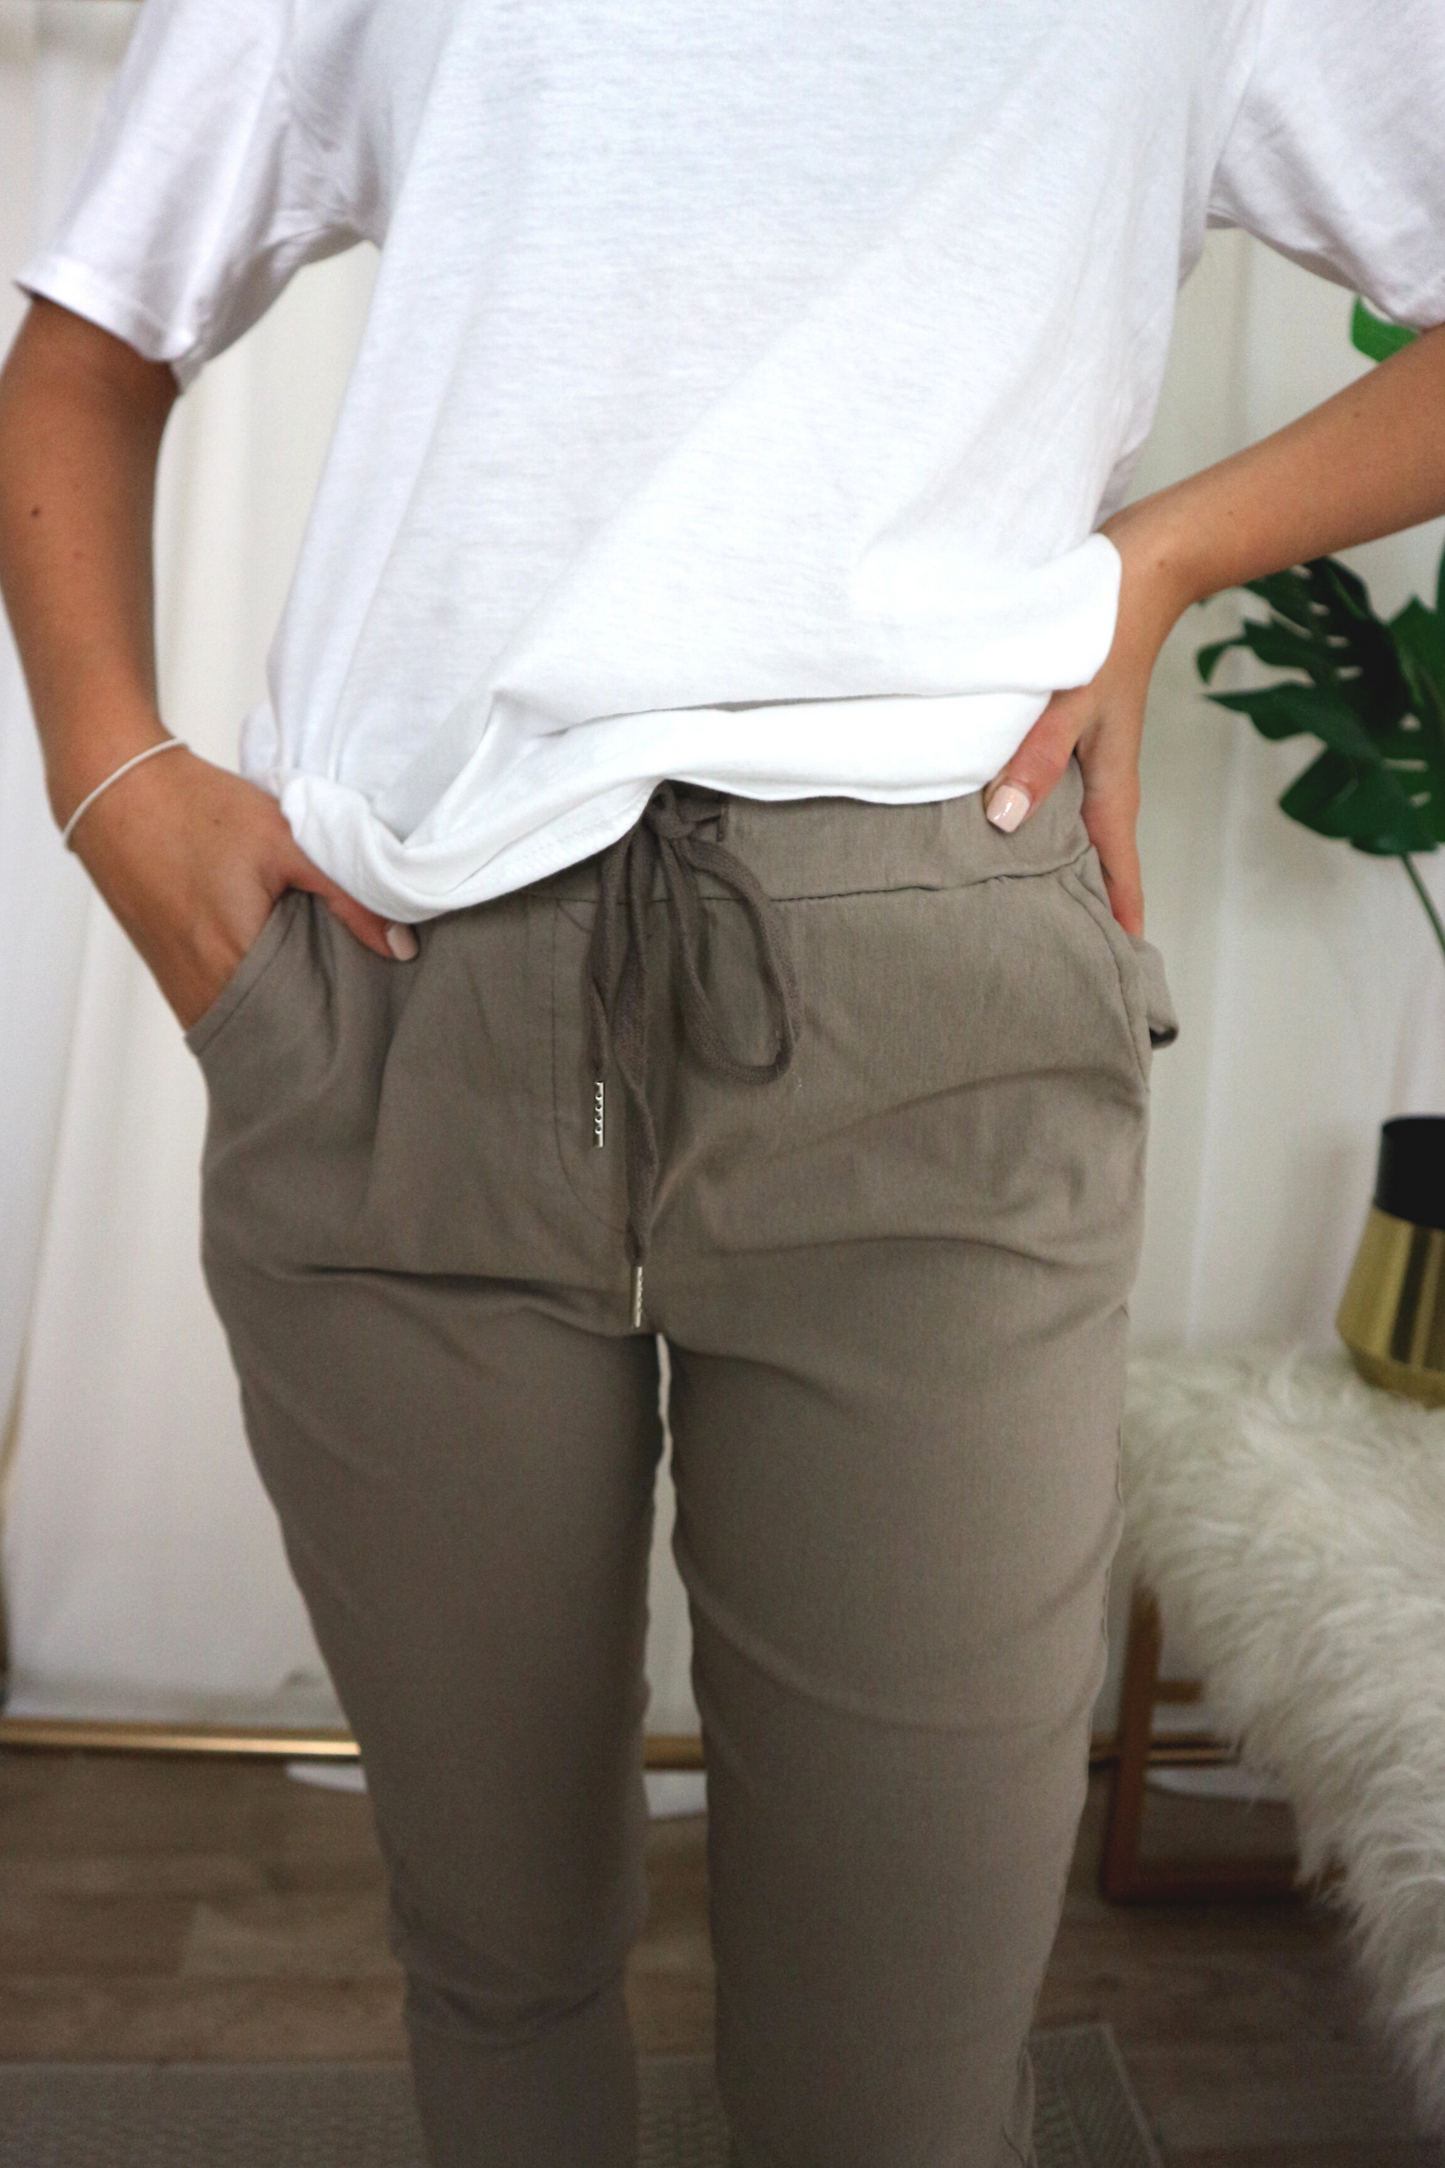 Cappuccino Bestseller Stretchy Pants